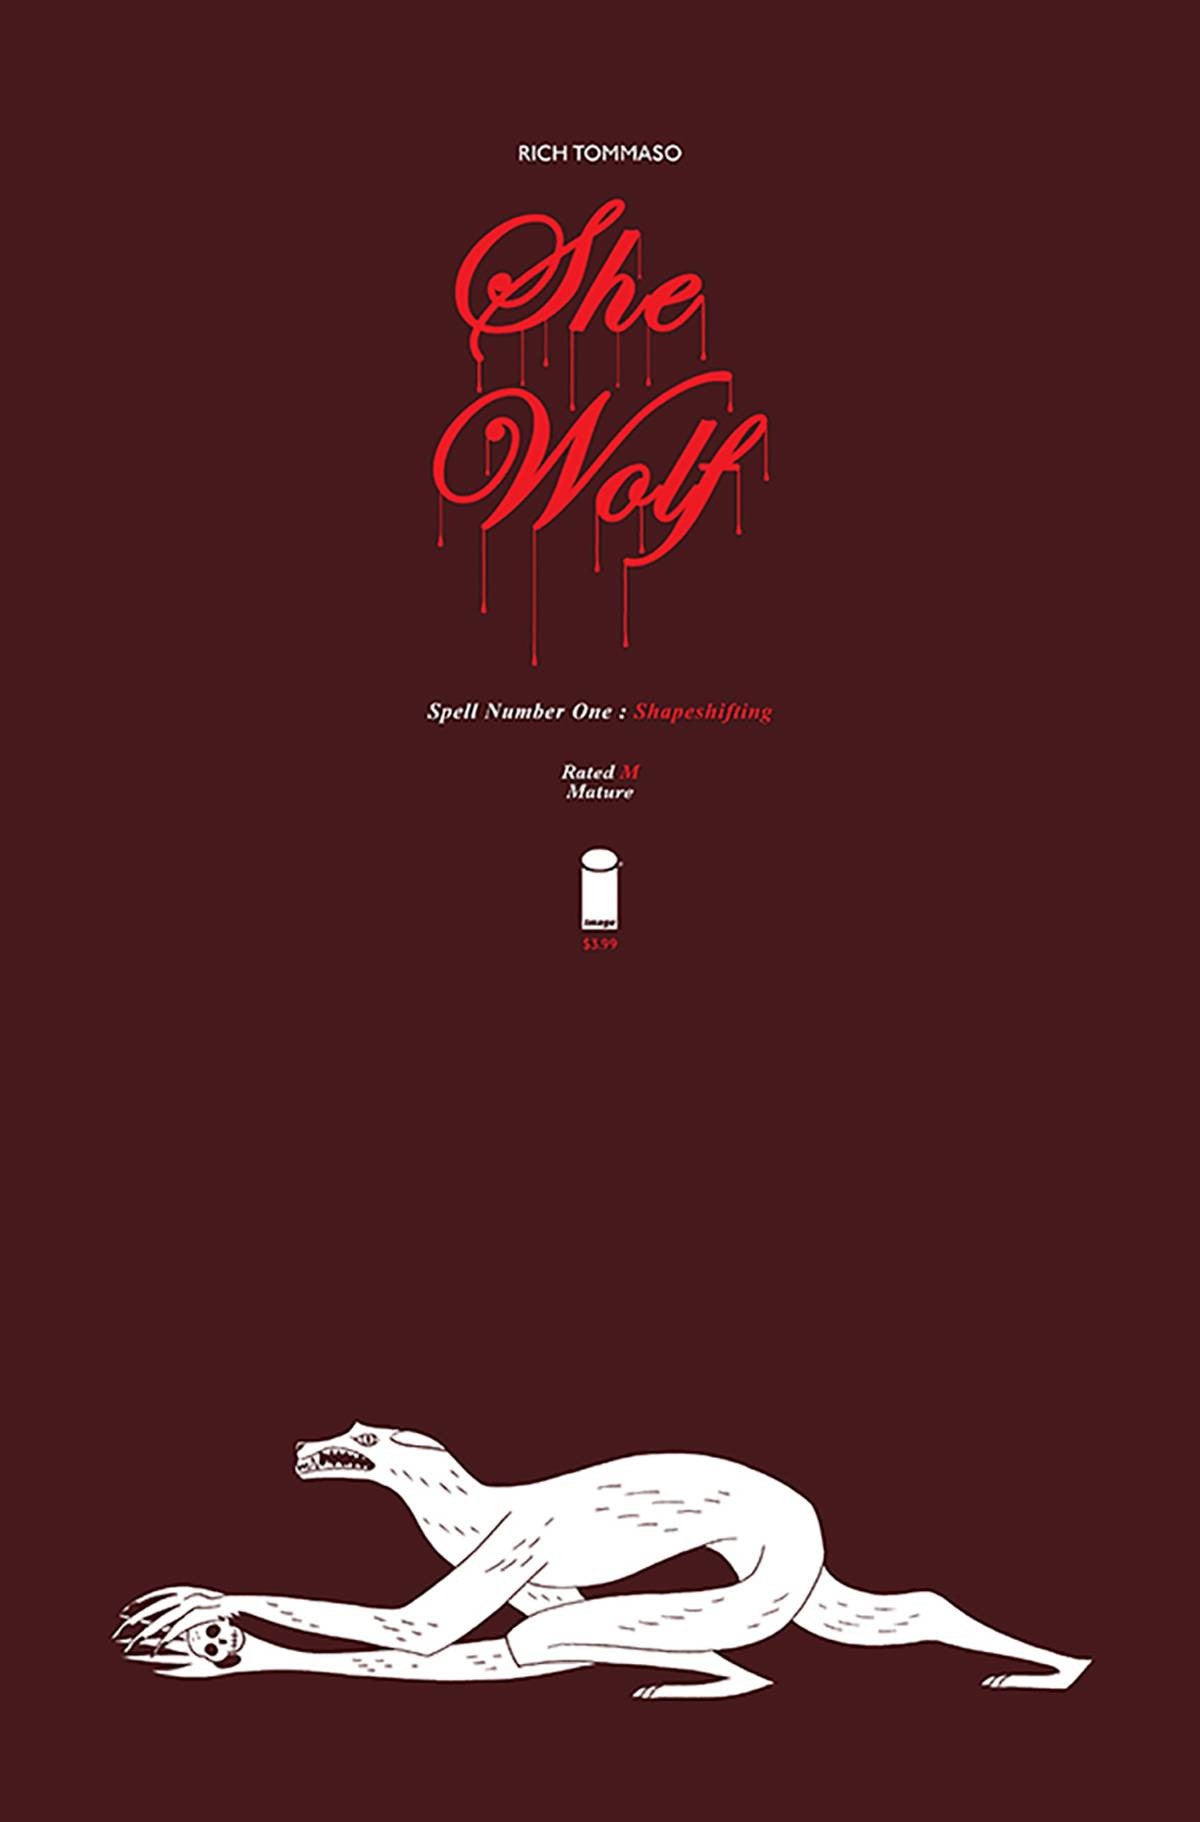 SHE WOLF #1 (MR) COVER